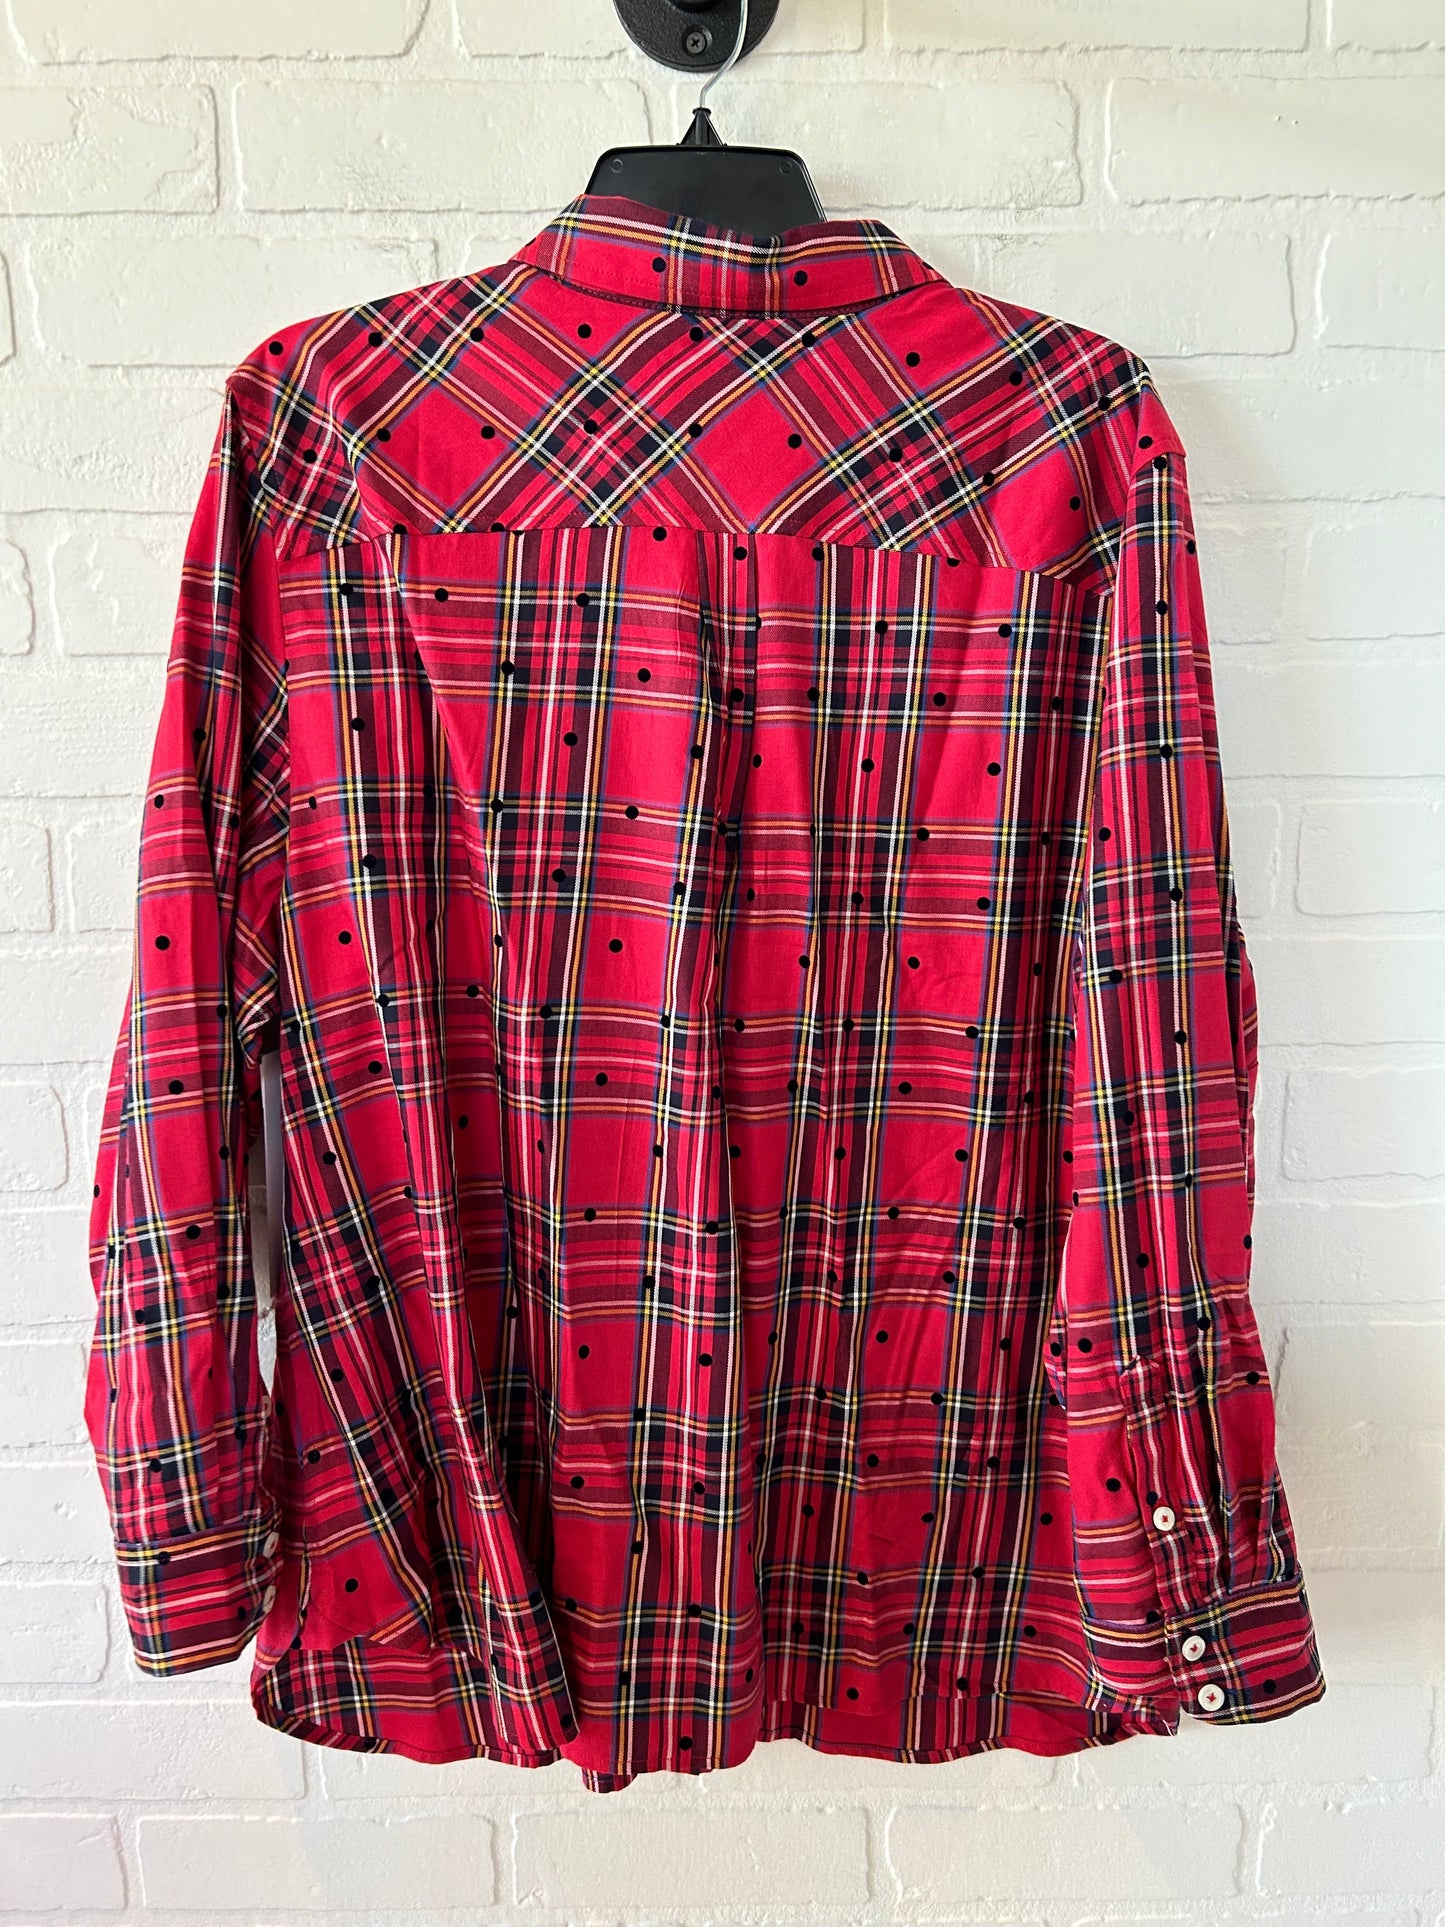 Black & Red Blouse Long Sleeve Talbots, Size 3x